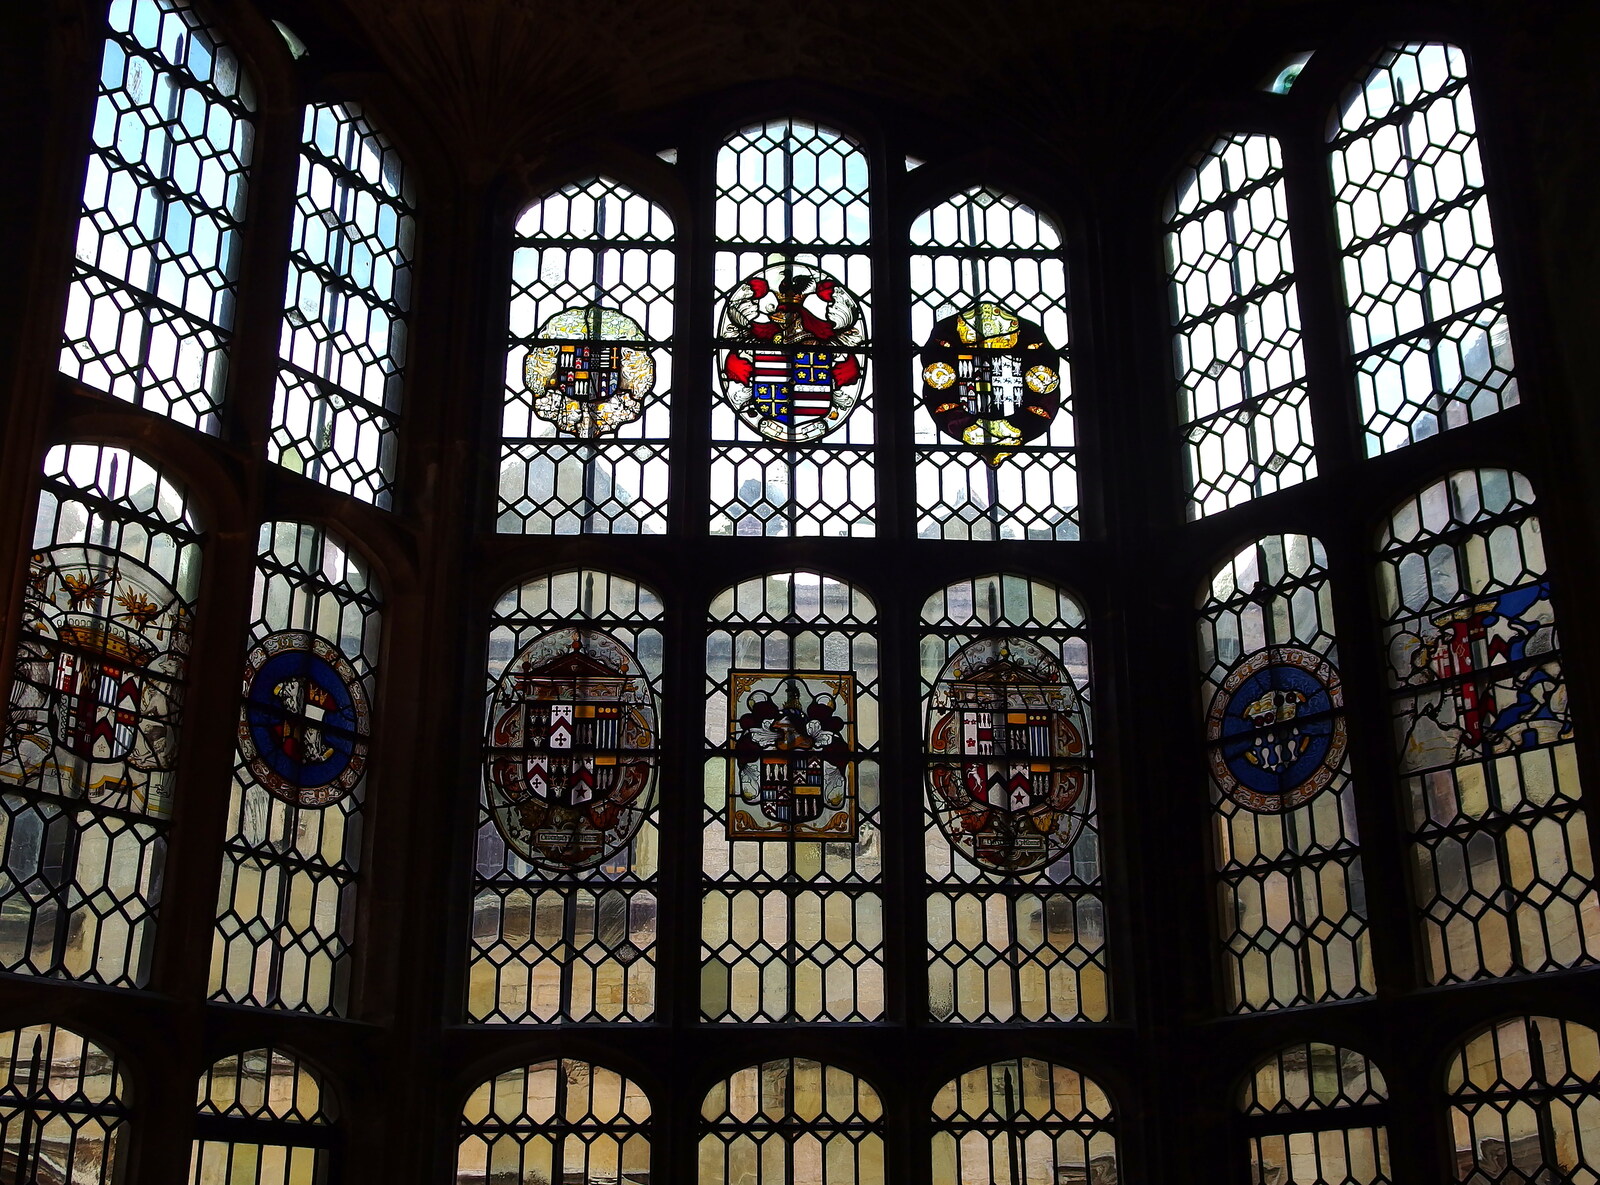 Impressive mediaeval windows from The BBs at Hengrave Hall, Hengrave, Suffolk - 18th August 2013